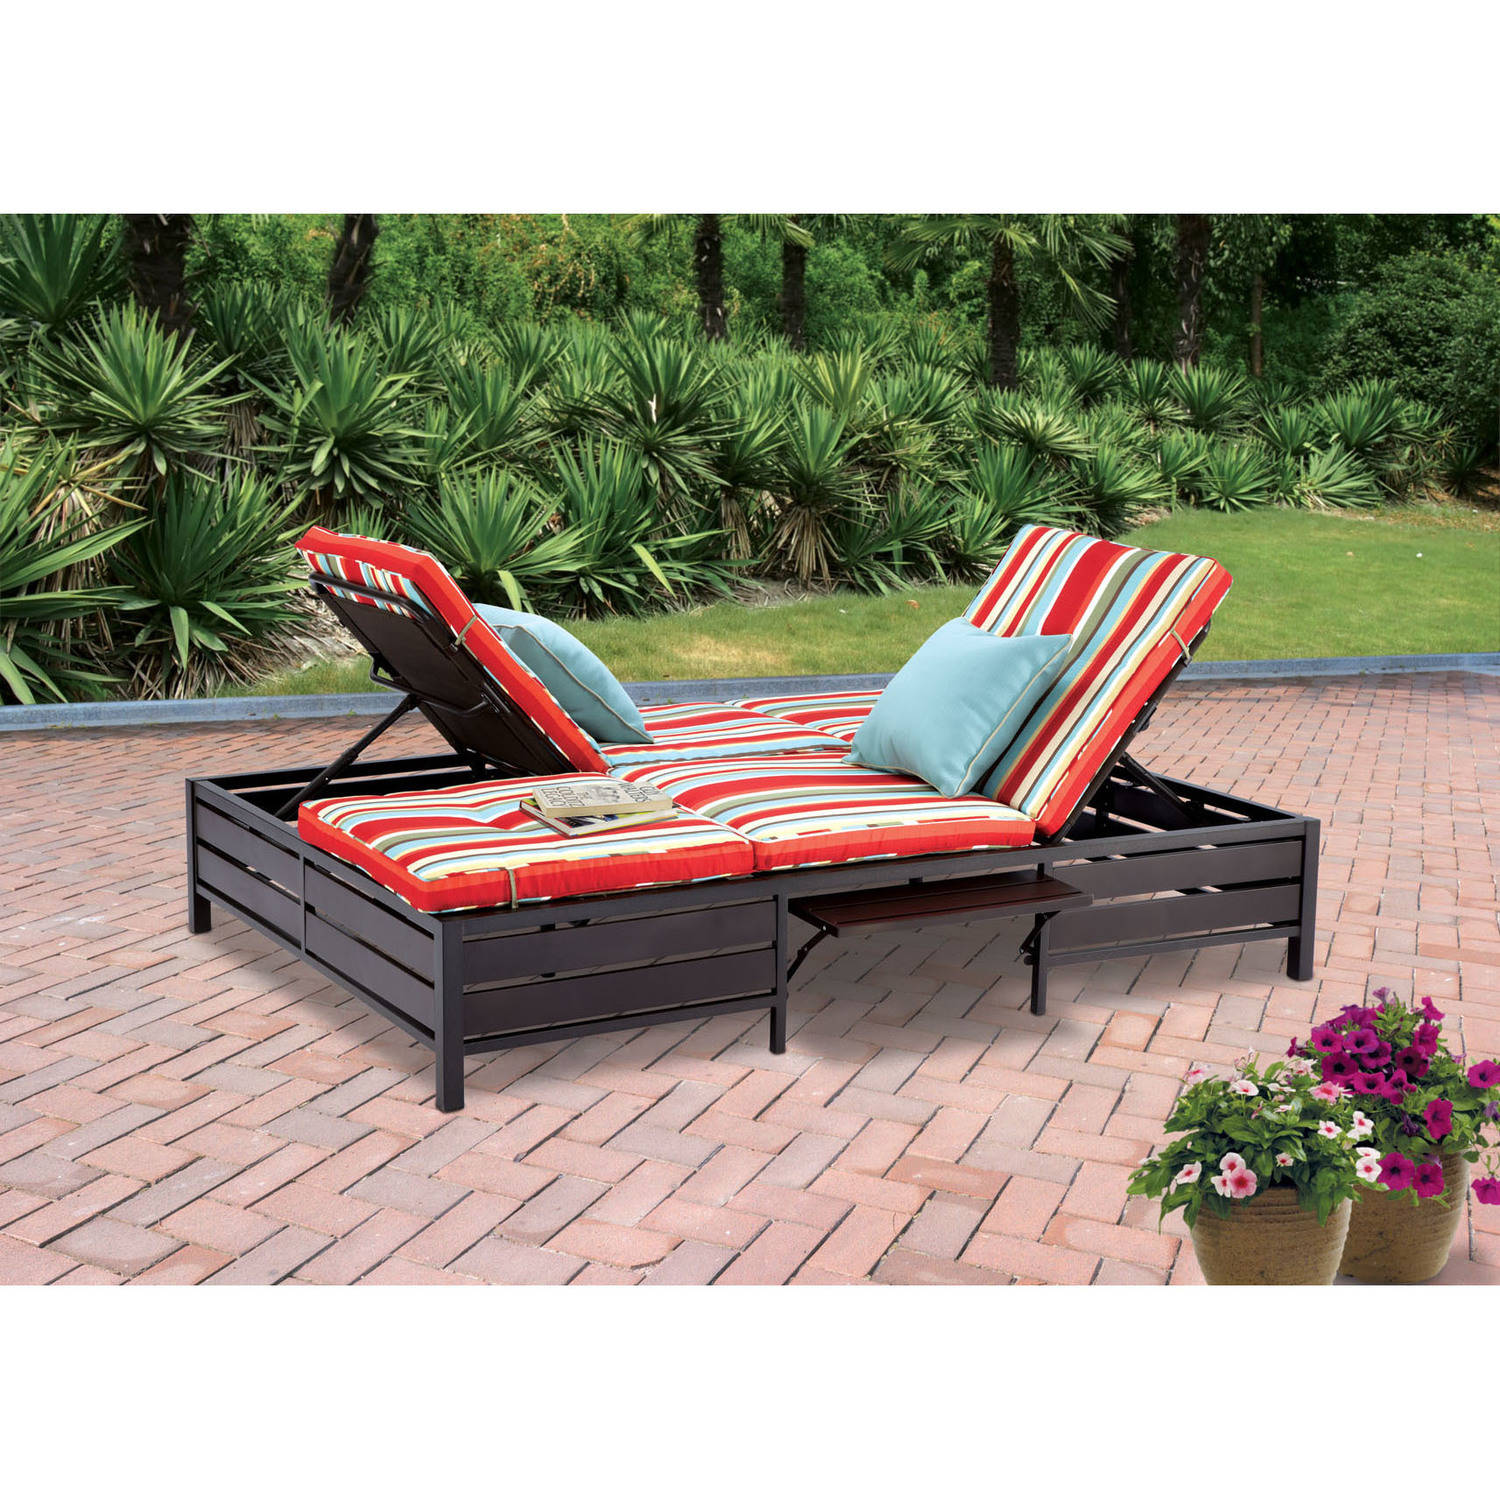 Mainstays Double Chaise Lounger with 3 Adjustable Positions, 2 Pop-up Side Tables – Seats 2